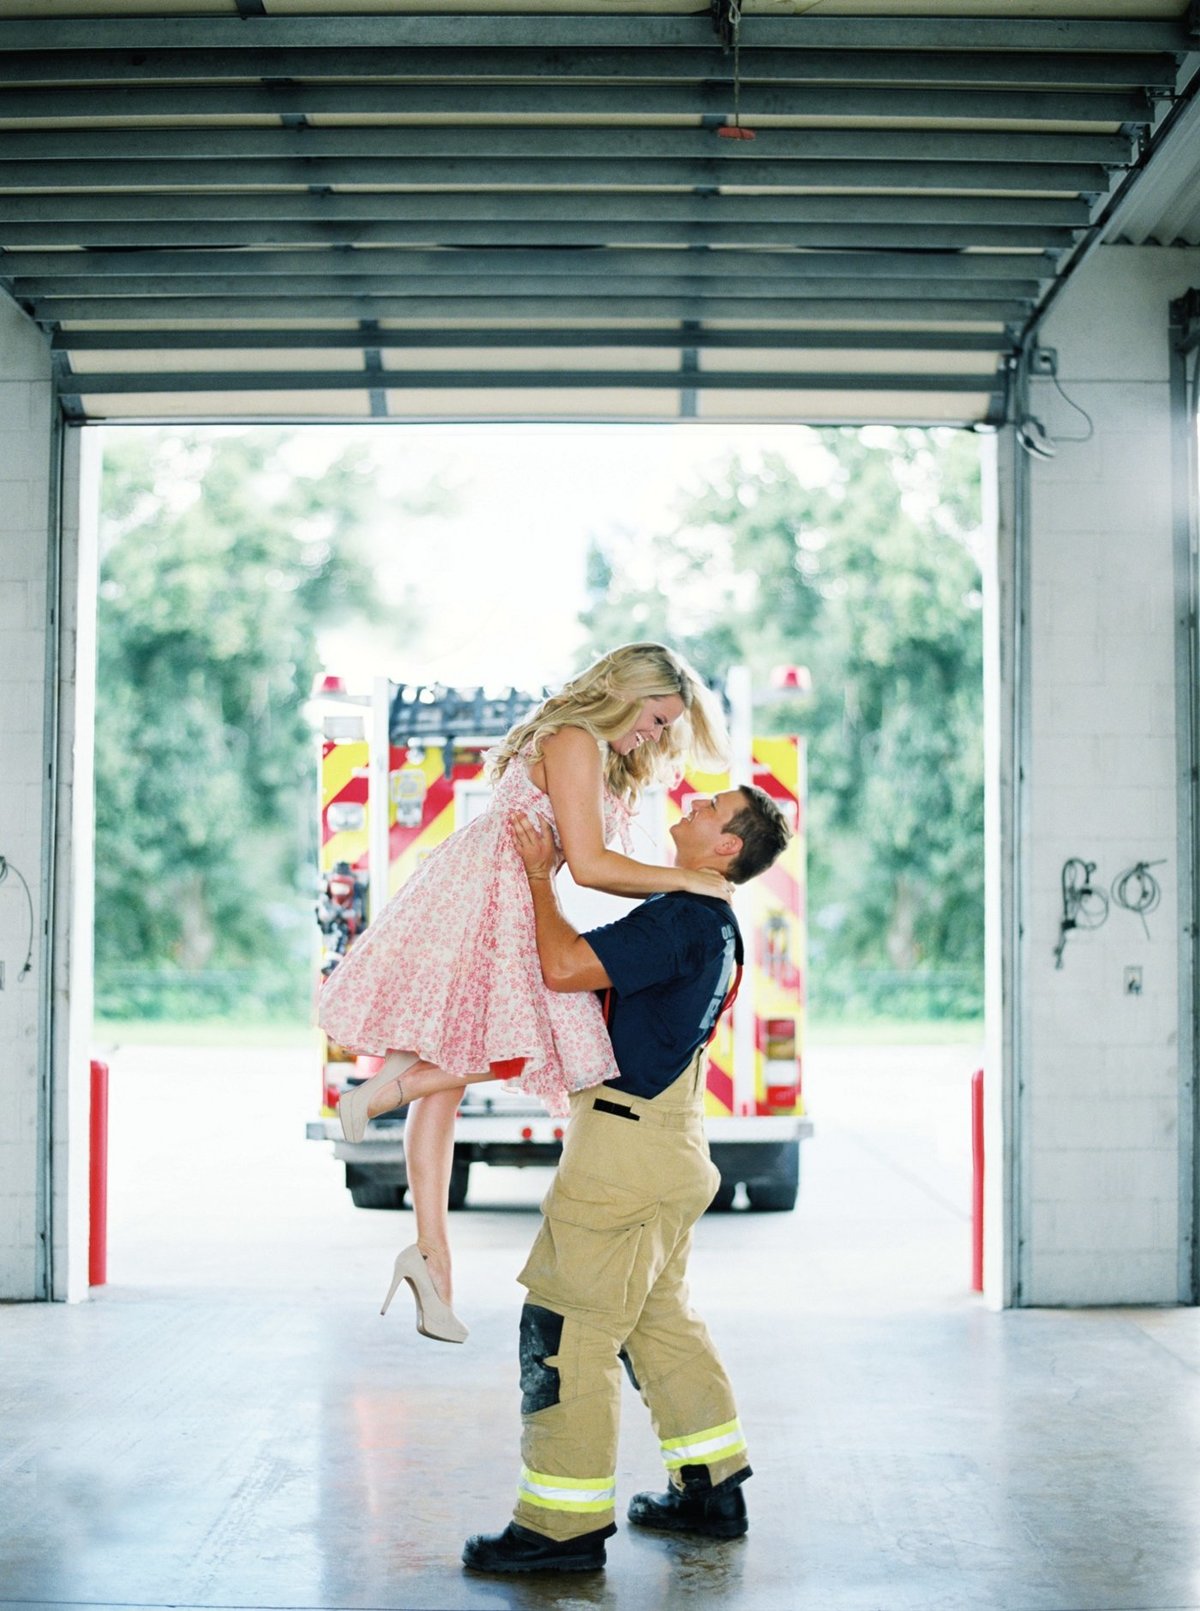 okeechobee wedding photographer - firefighter engagement session - countryside engagement session - tiffany danielle photography (3)